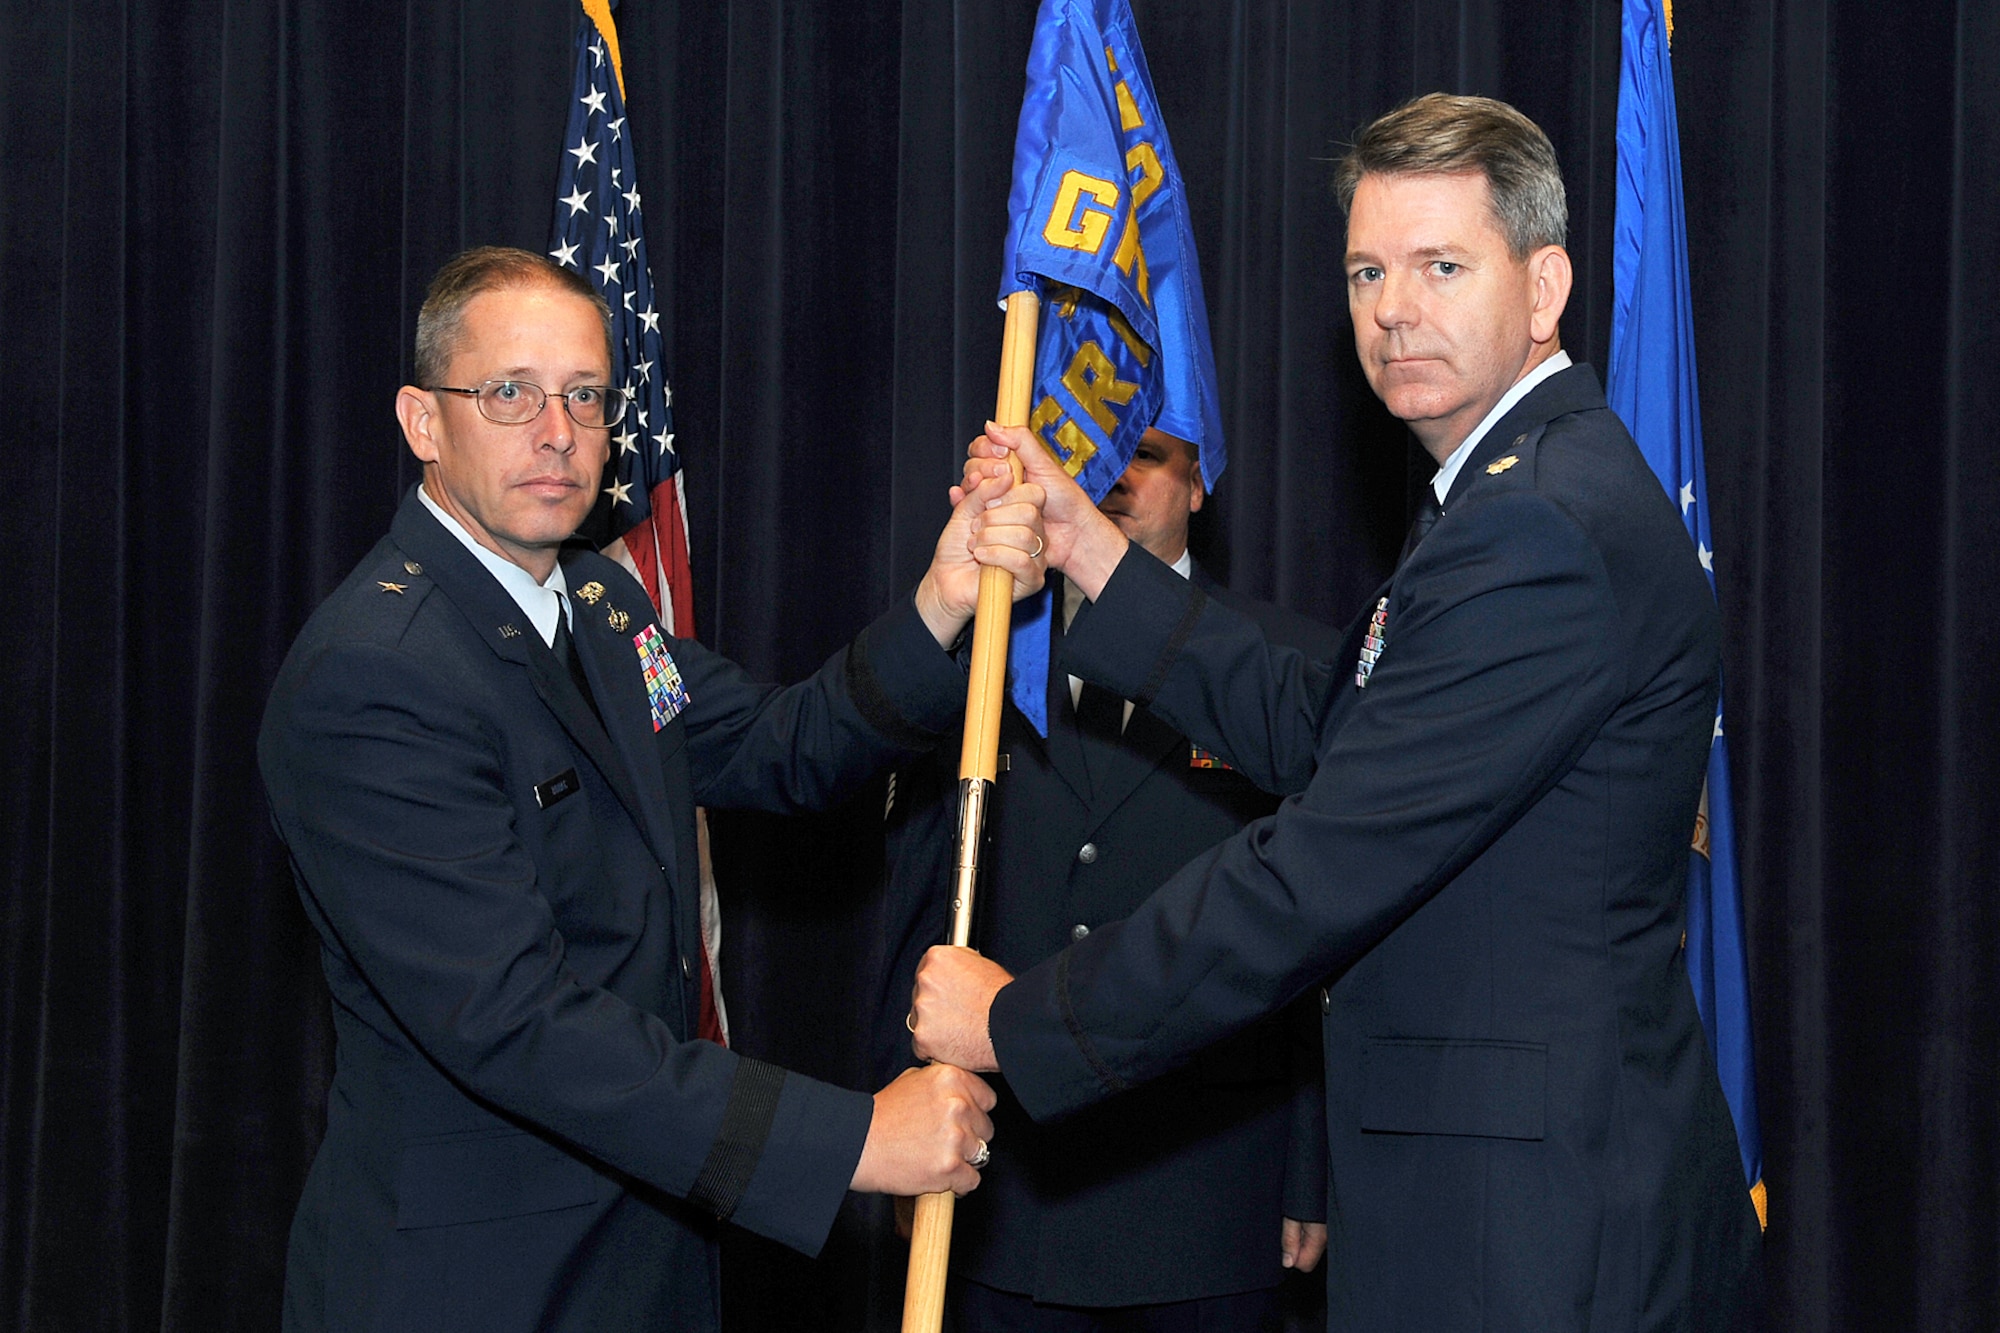 U.S. Air Force Brig. Gen. Daryl Bohac, assistant adjutant general, Nebraska Air National Guard, passes the guidon to Lt. Col. James Stevenson, incoming 170th Group commander, during a change of command ceremony inside the Air Force Weather Agency's auditorium on Offutt Air Force Base, Neb., July 9. (U.S. Air Force Photo by Charles Haymond/Released)
